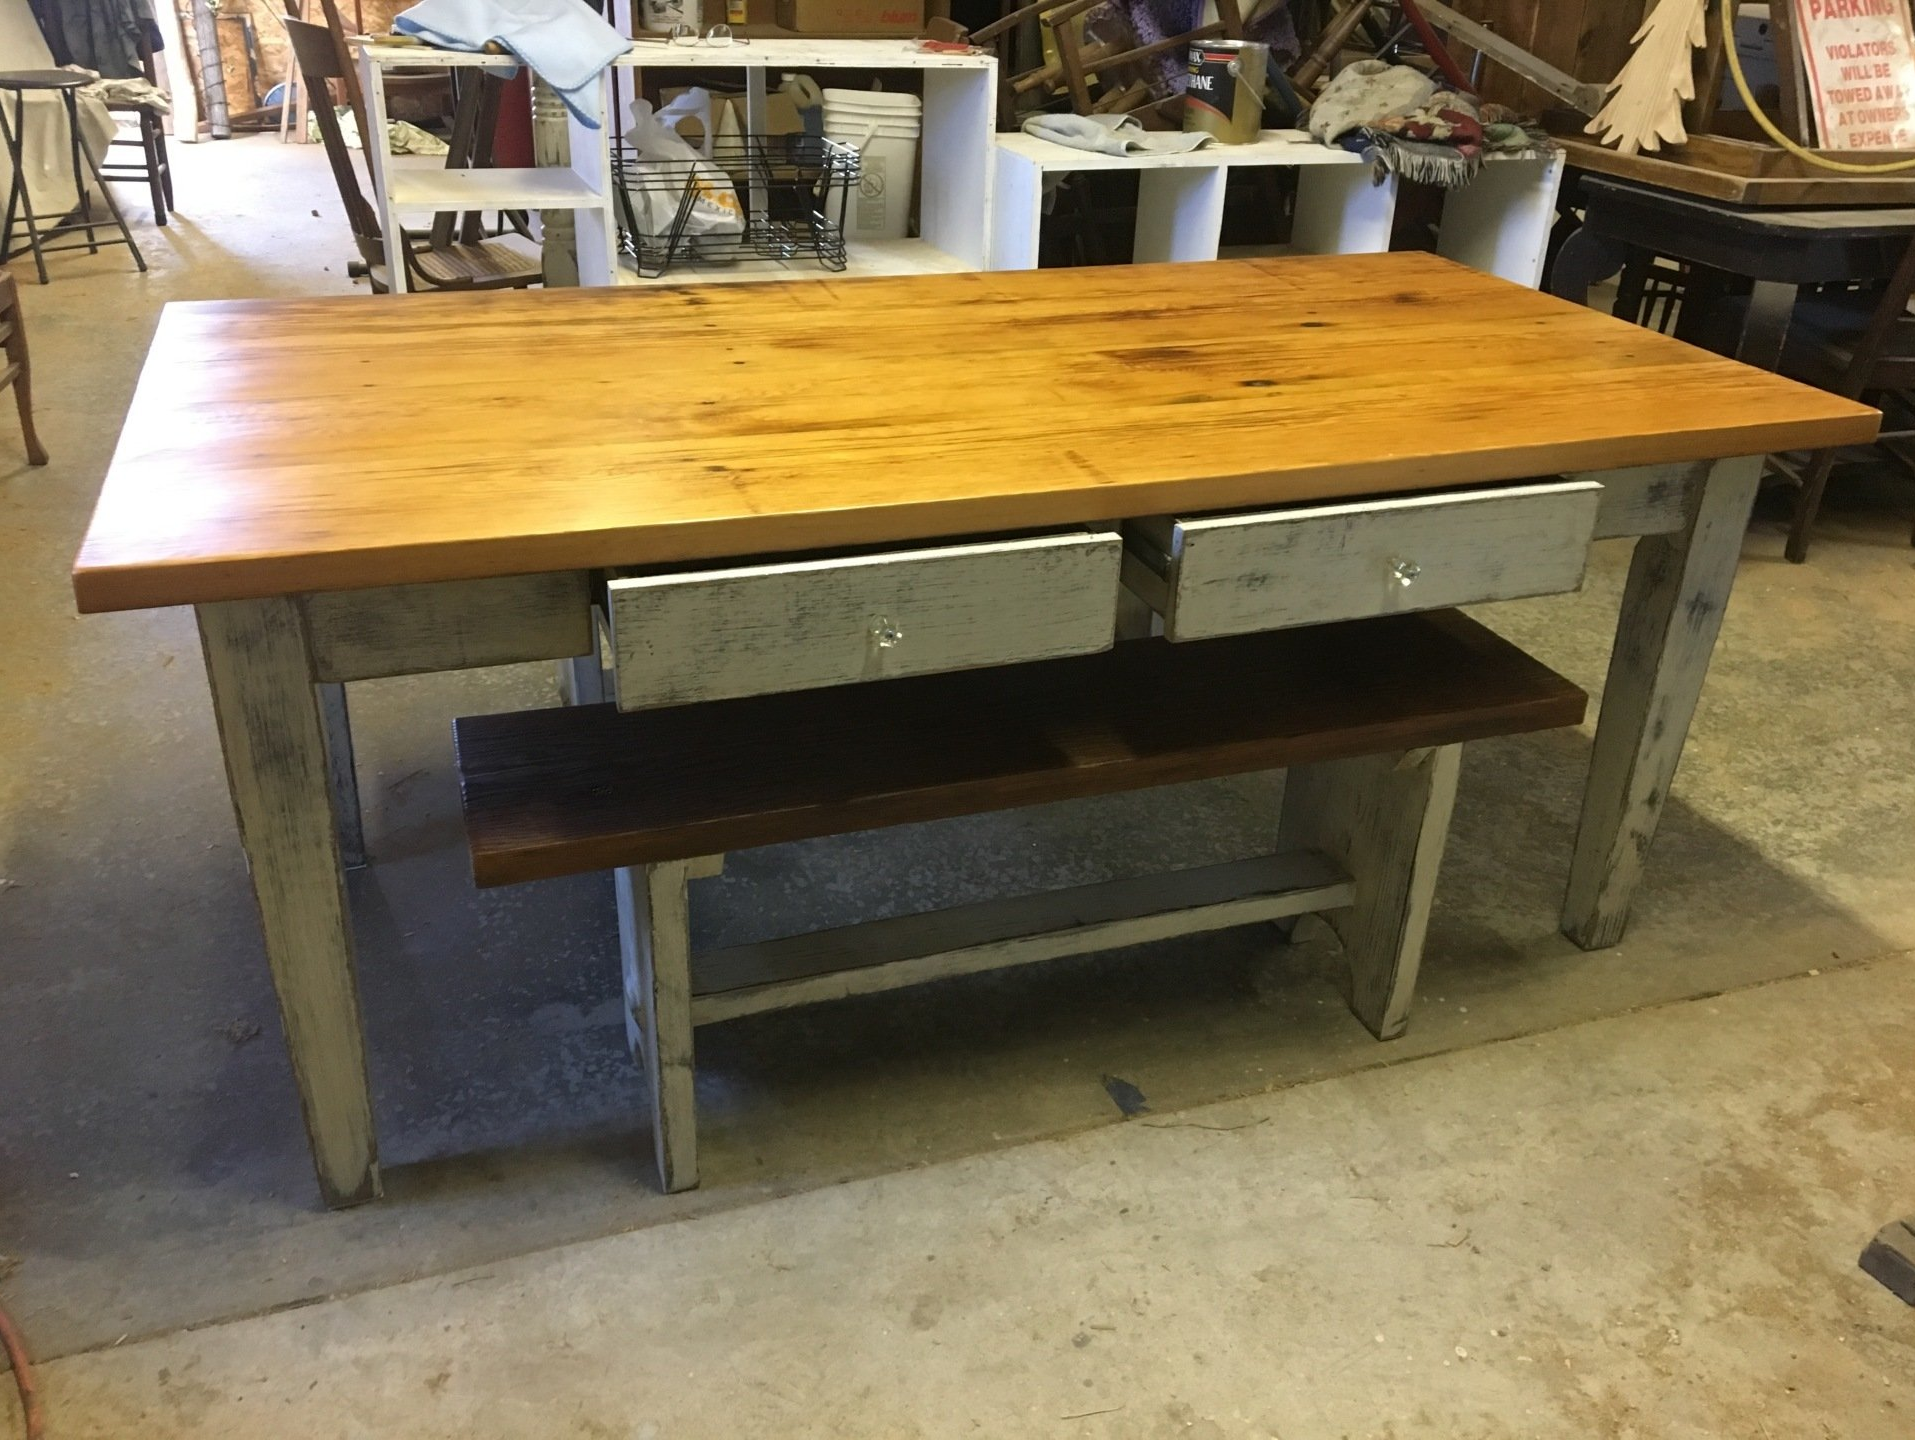 Bleacher wood table and benches in workshop.